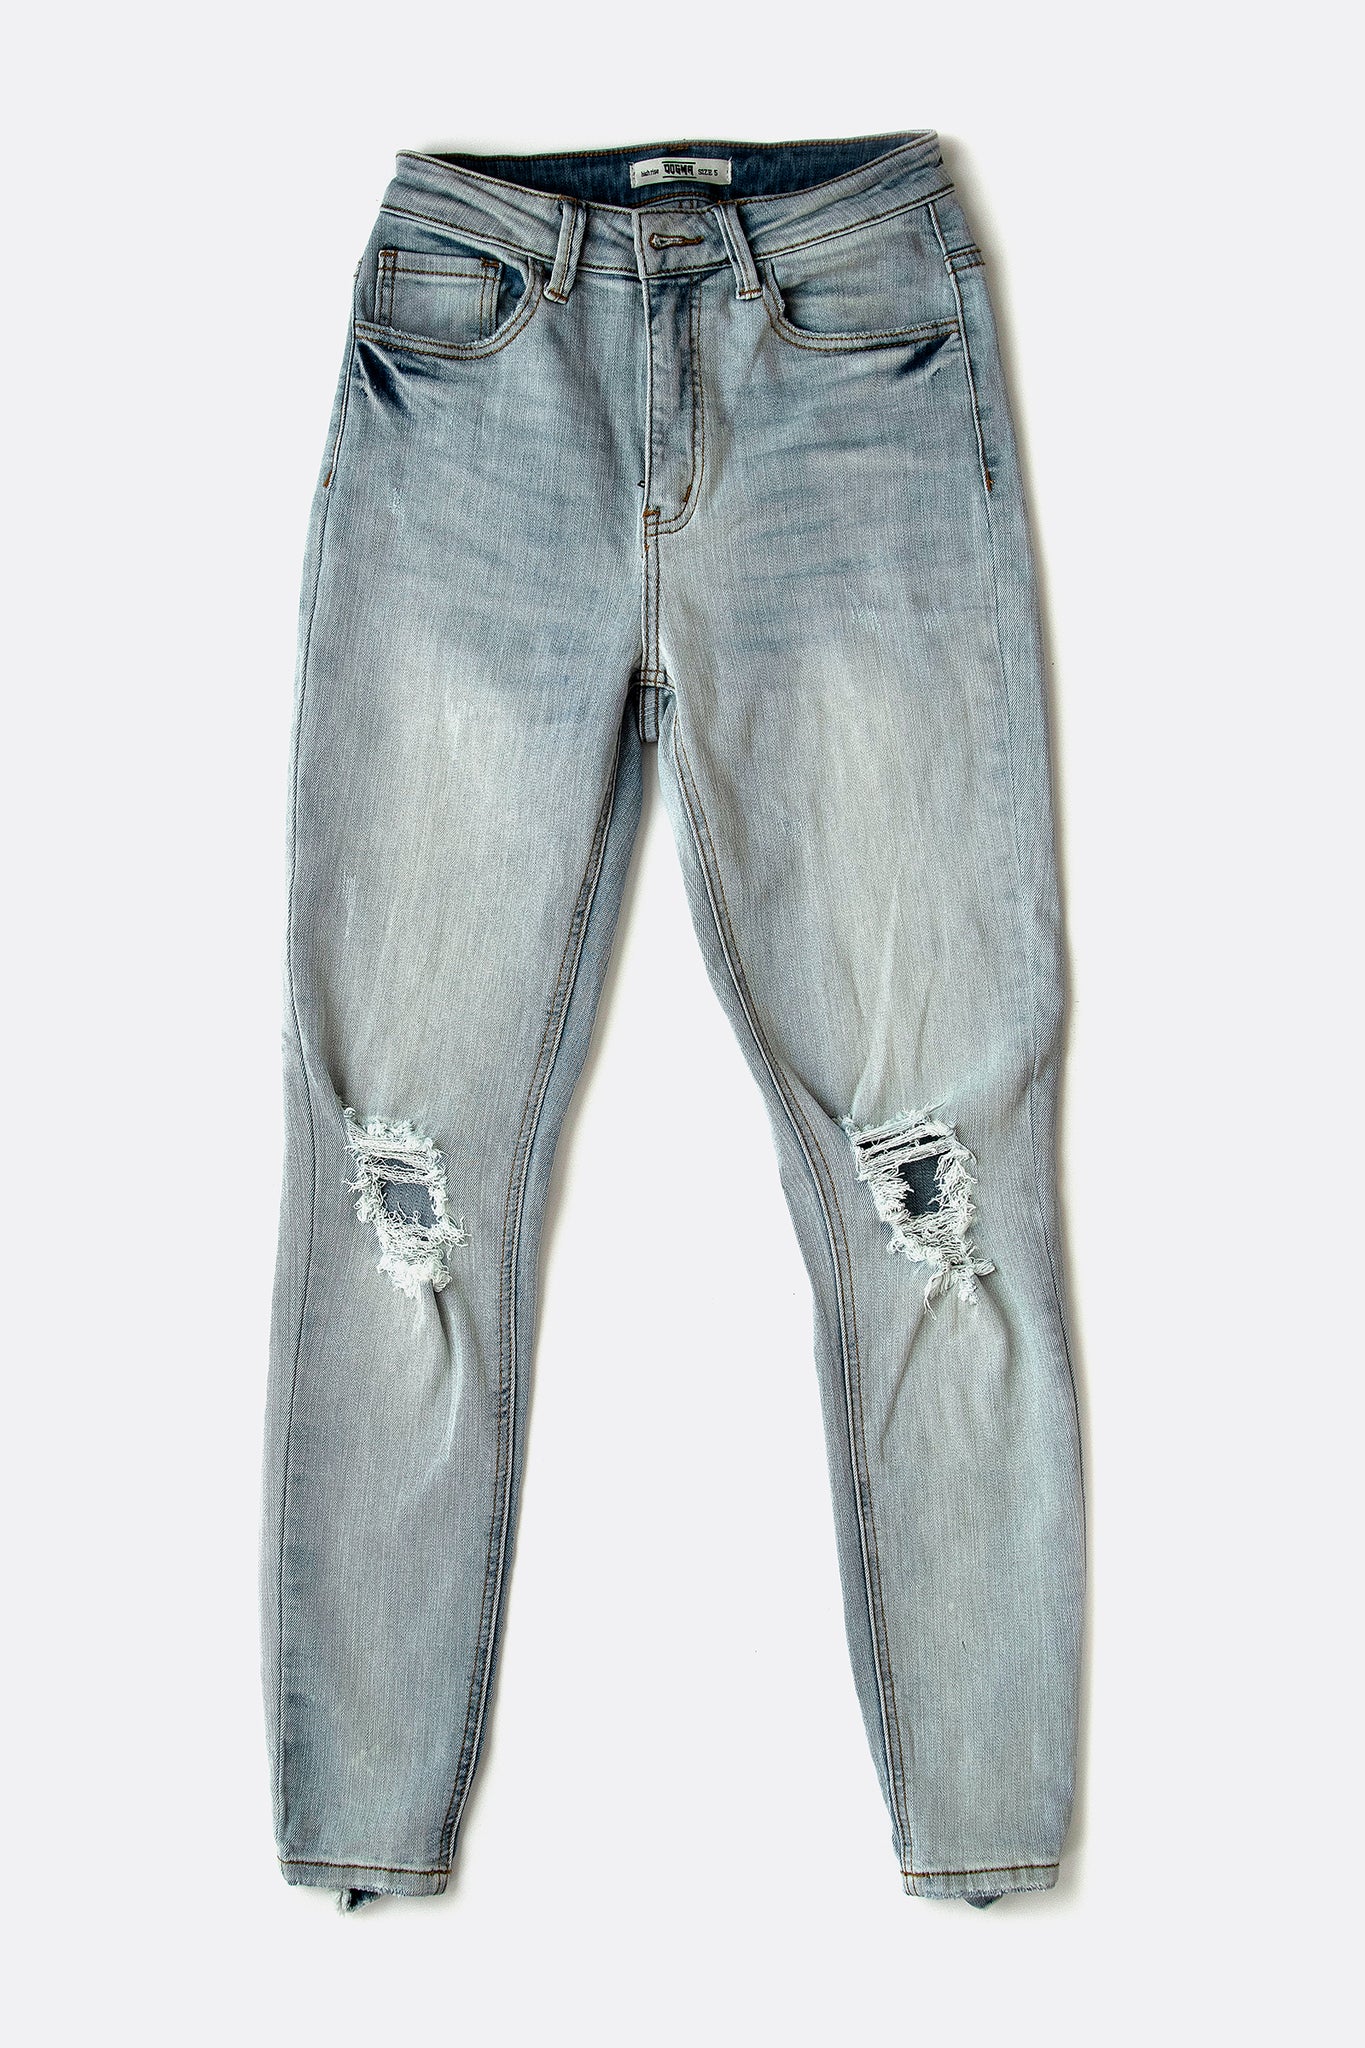 Not Your Cowboy's Jeans